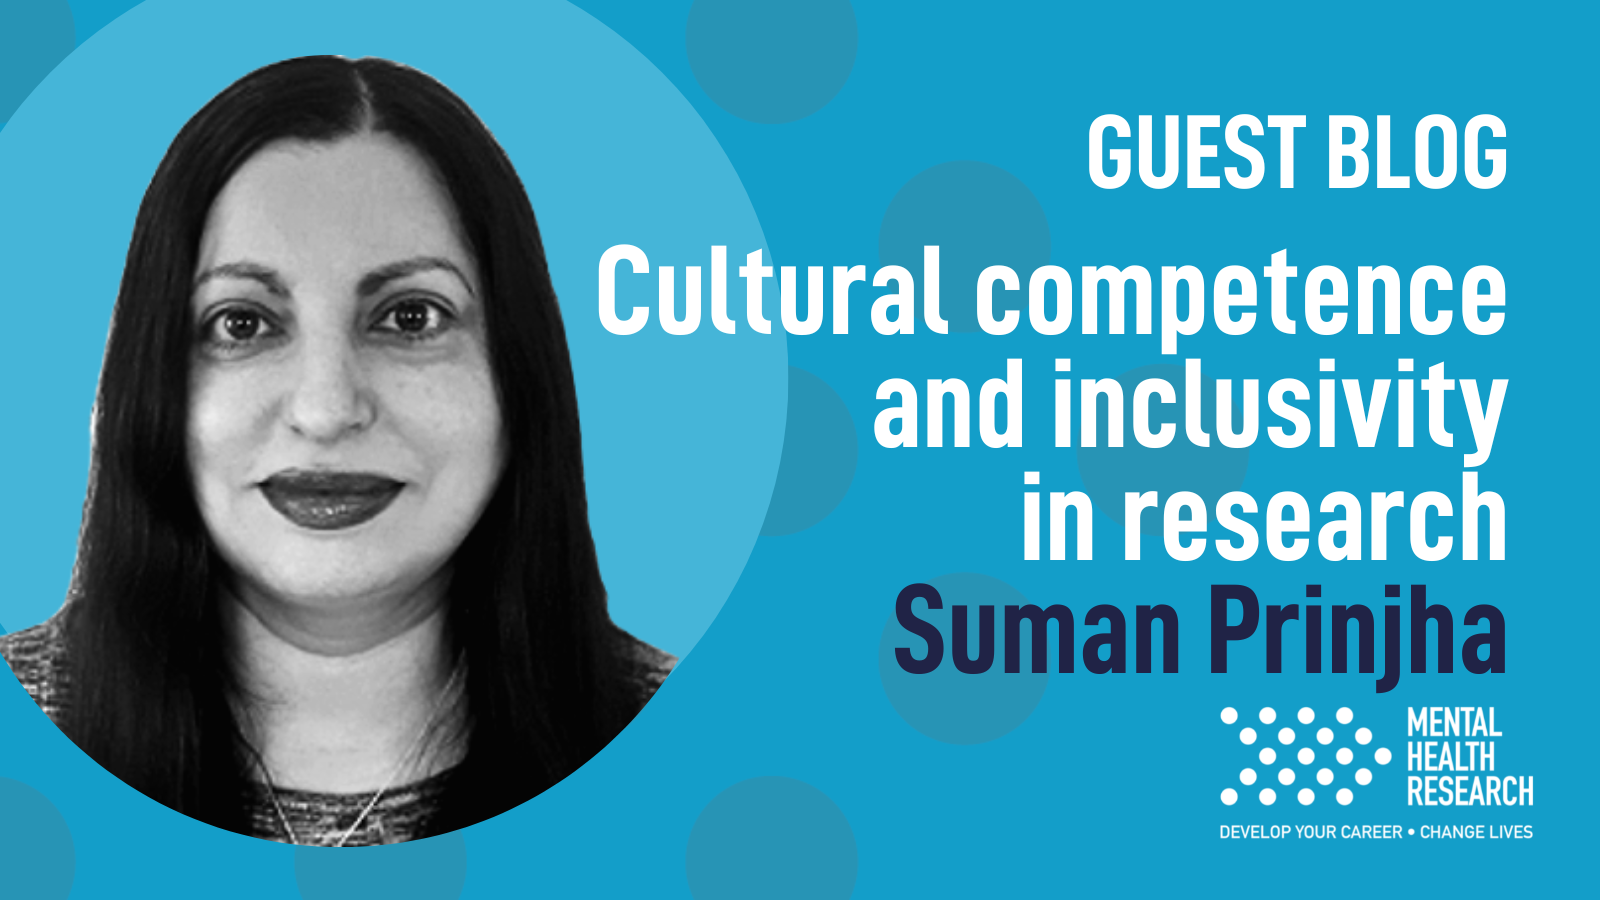 Cultural competence and inclusivity in research – Dr Suman Prinjha